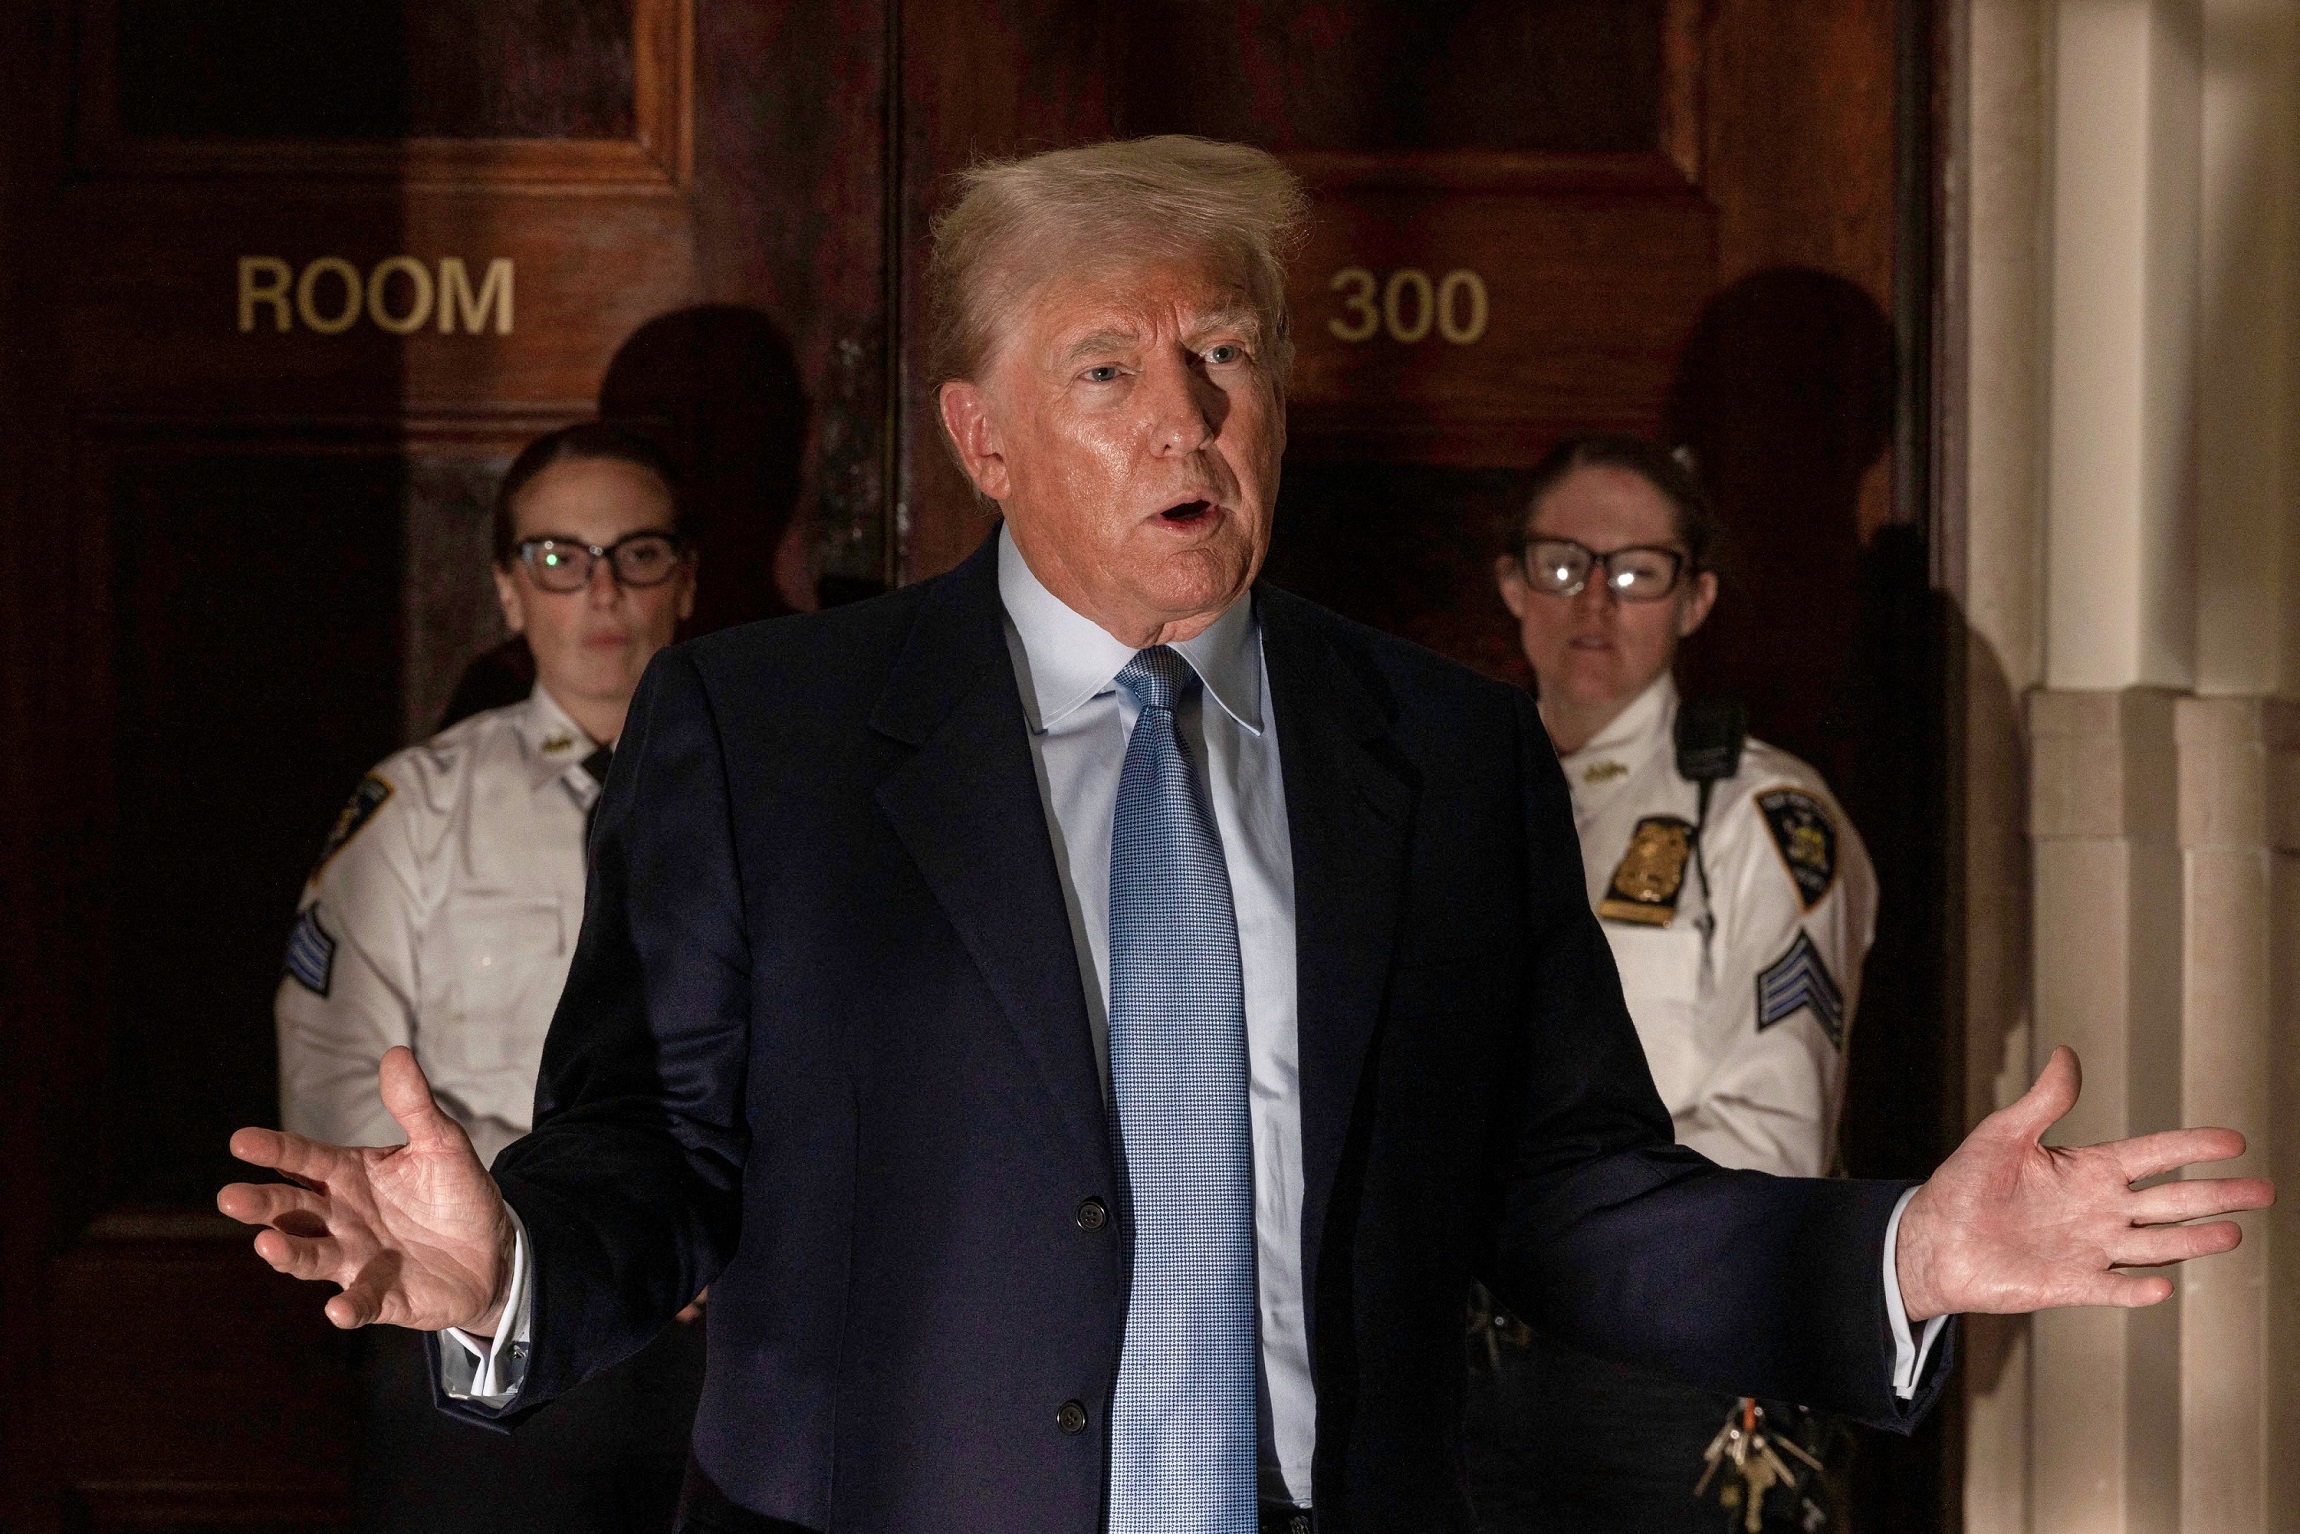 NY Court Employee Arrested for ‘Yelling Out’ to Trump at Civil Trial | NTD